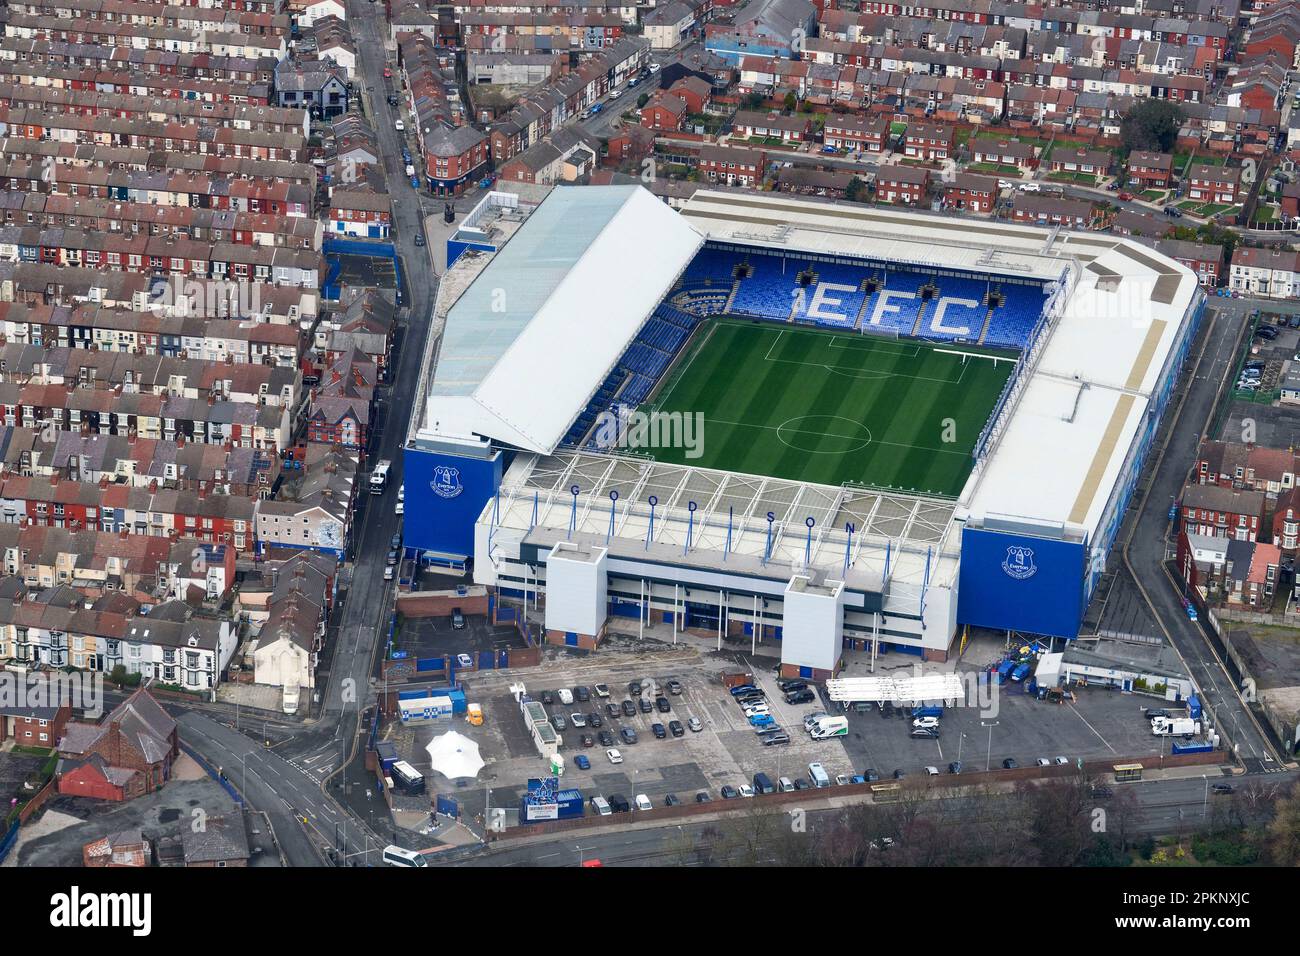 Everton Football Club, Goodison park, Liverpool, North West England, from the air Stock Photo